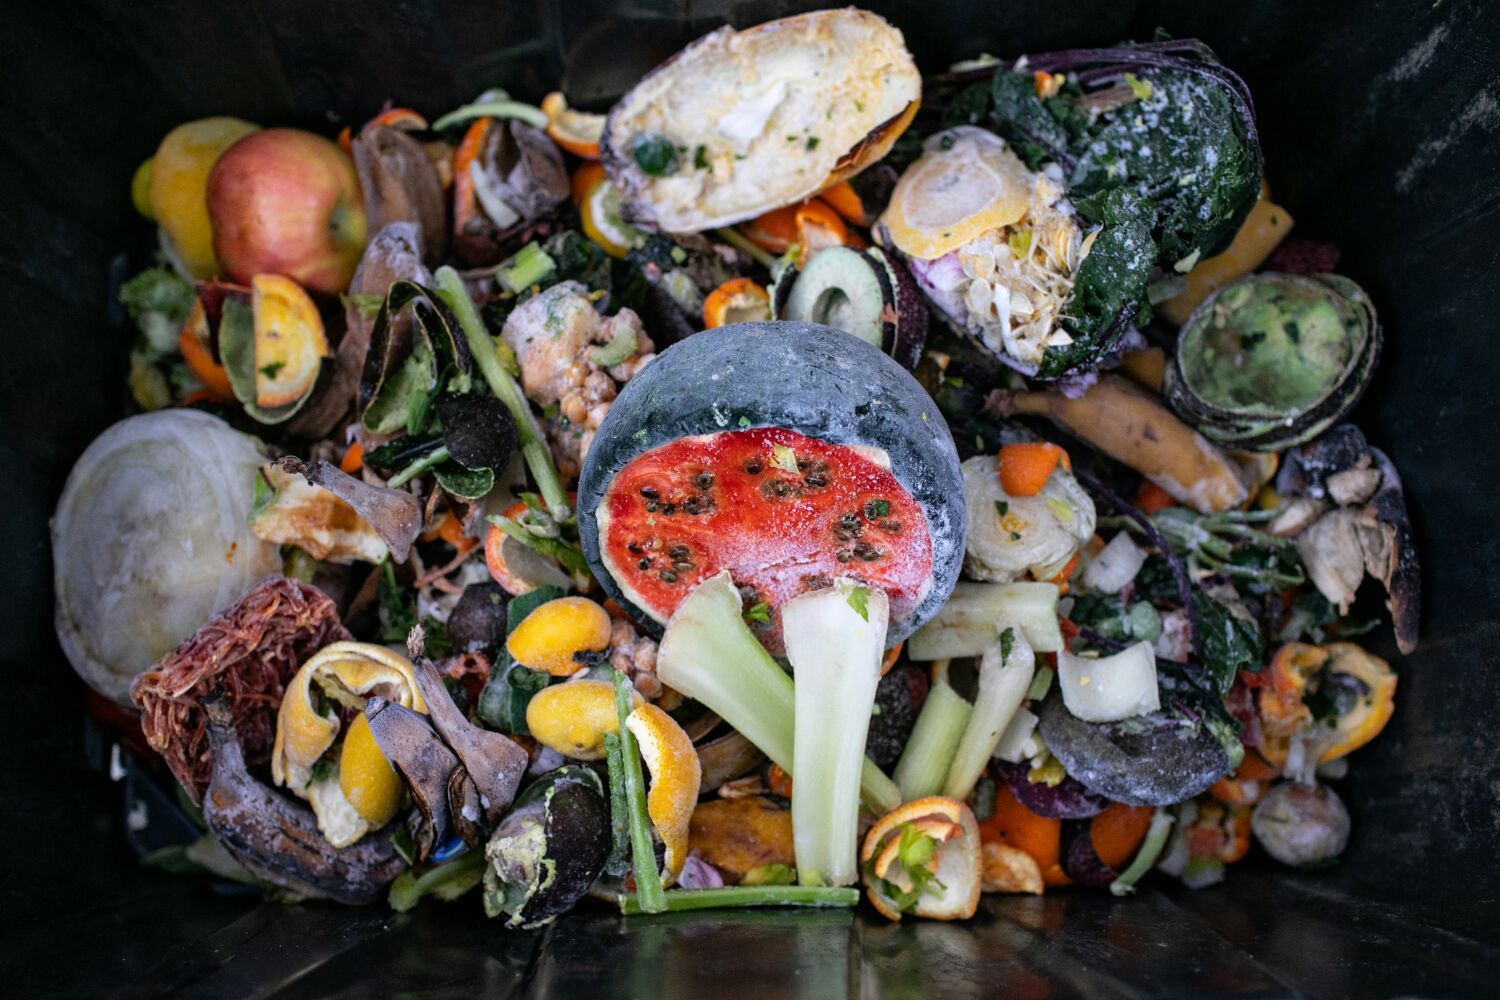 L.A. now picks up your compostable food scraps. Here's what you have to do